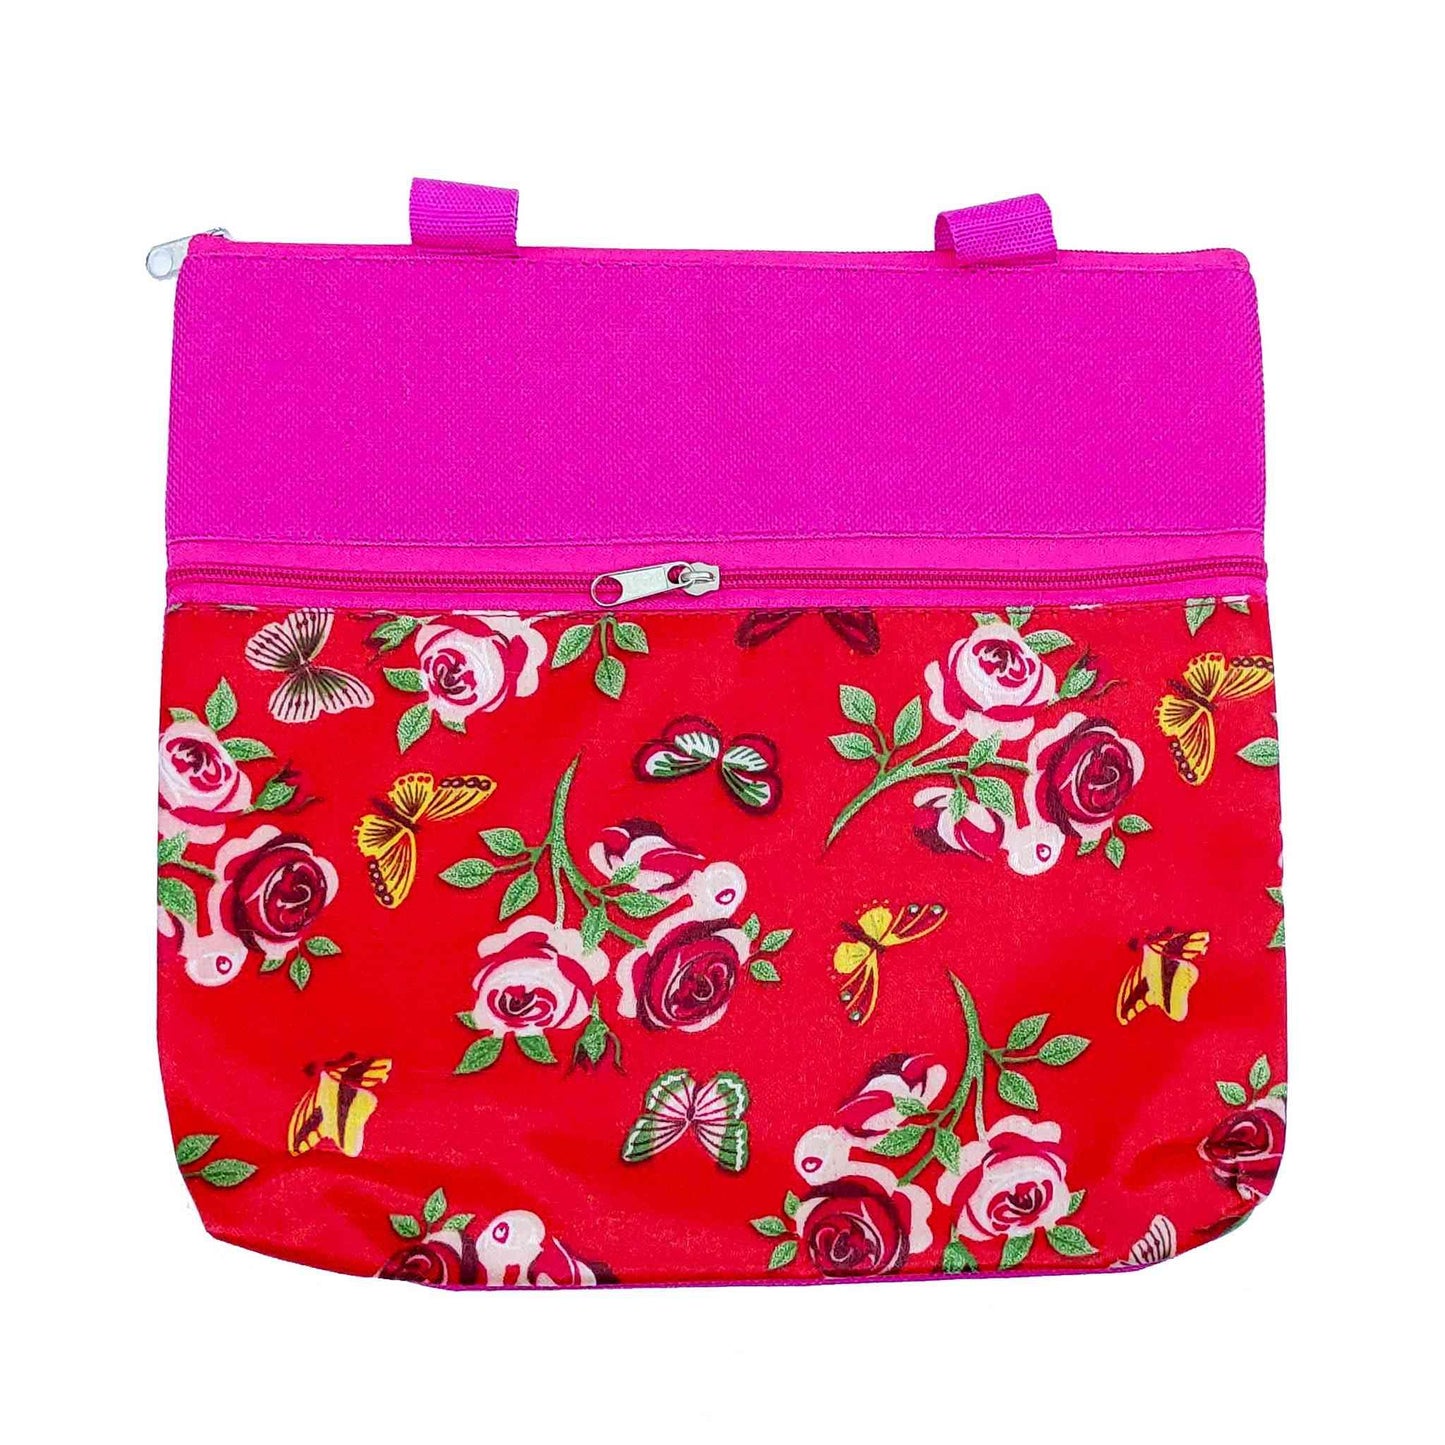 Indian Petals Imported Durable Canvas Printed multi purpose utility Medium size Bag with handles for all occasions for the girls and ladies, Design 3, Pink - Indian Petals